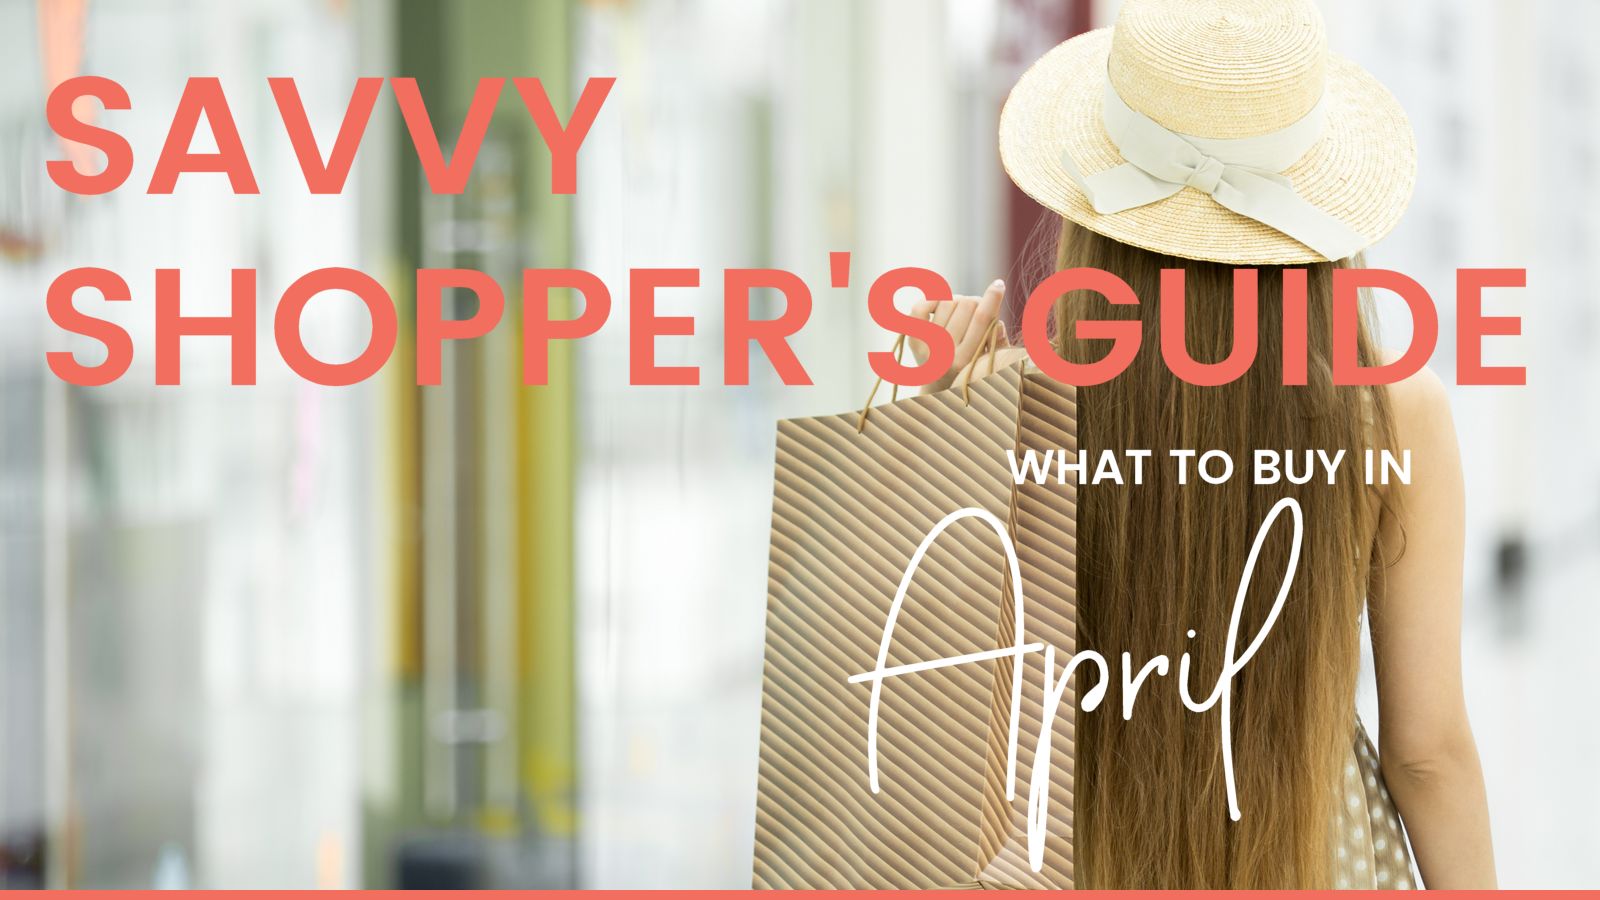 Savvy Shopper's Guide - What to Buy in April